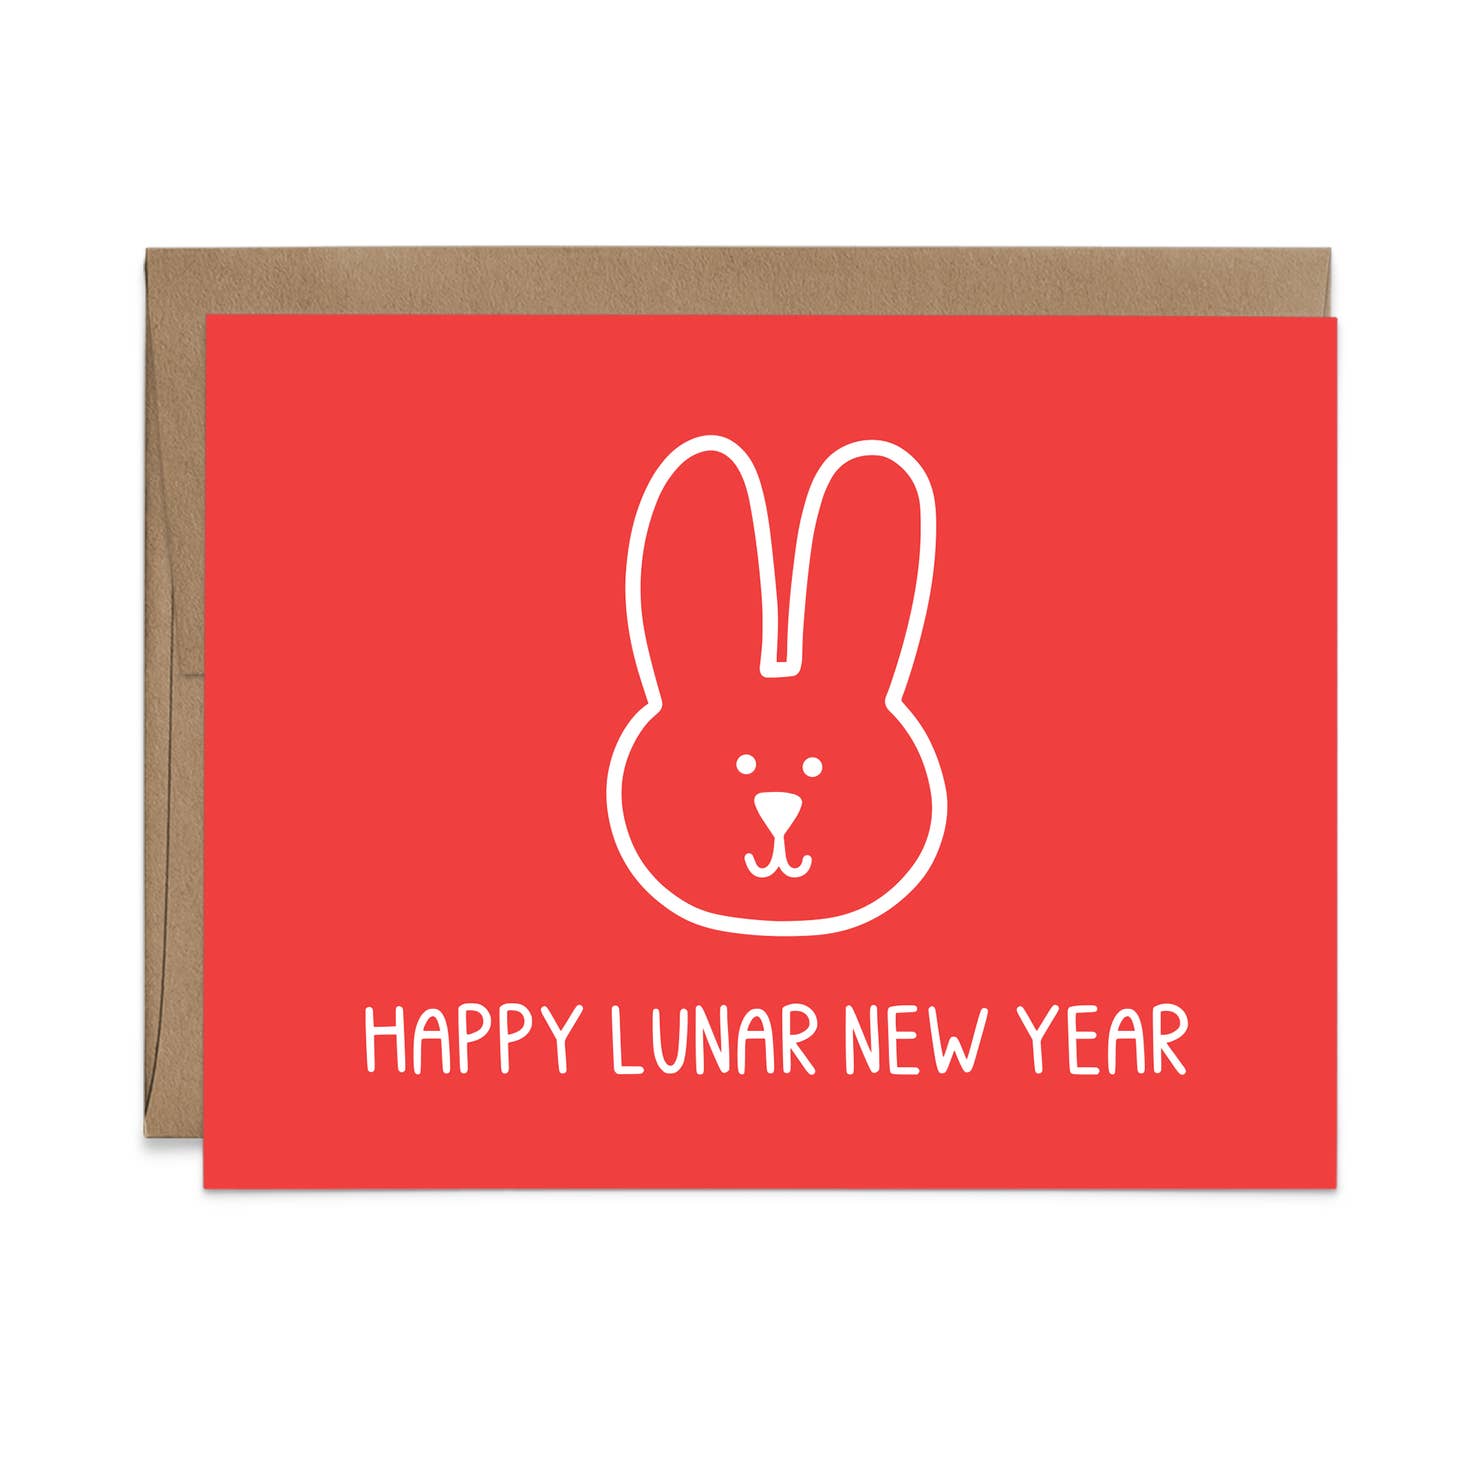 Red card with white text saying, "Happy Lunar New Year". Image of a white rabbit head in middle of card. A brown envelope is included.